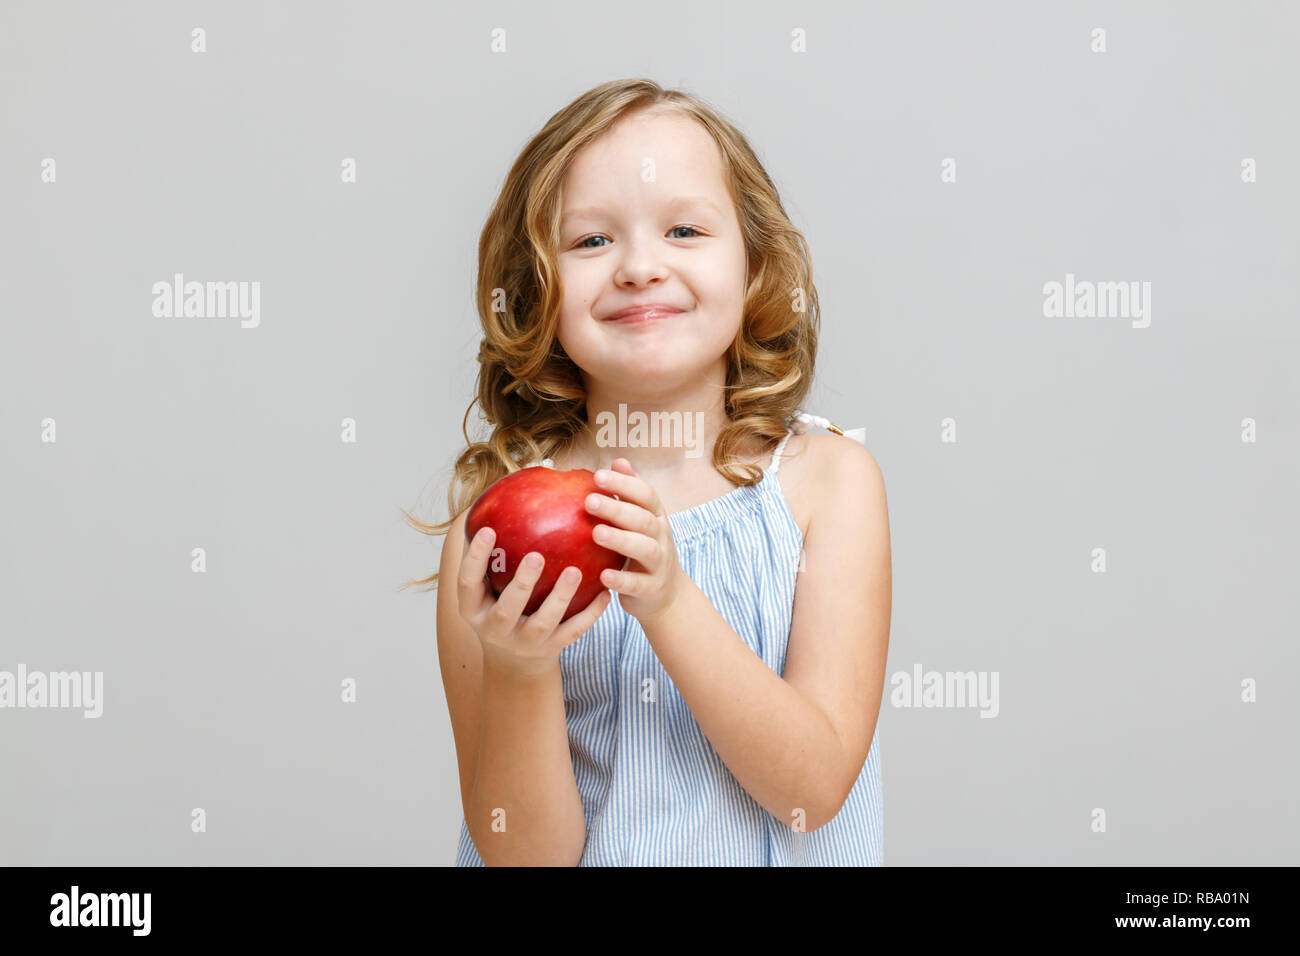 Portrait of a happy smiling little blonde girl on a gray background. Baby eating red apple Stock Photo